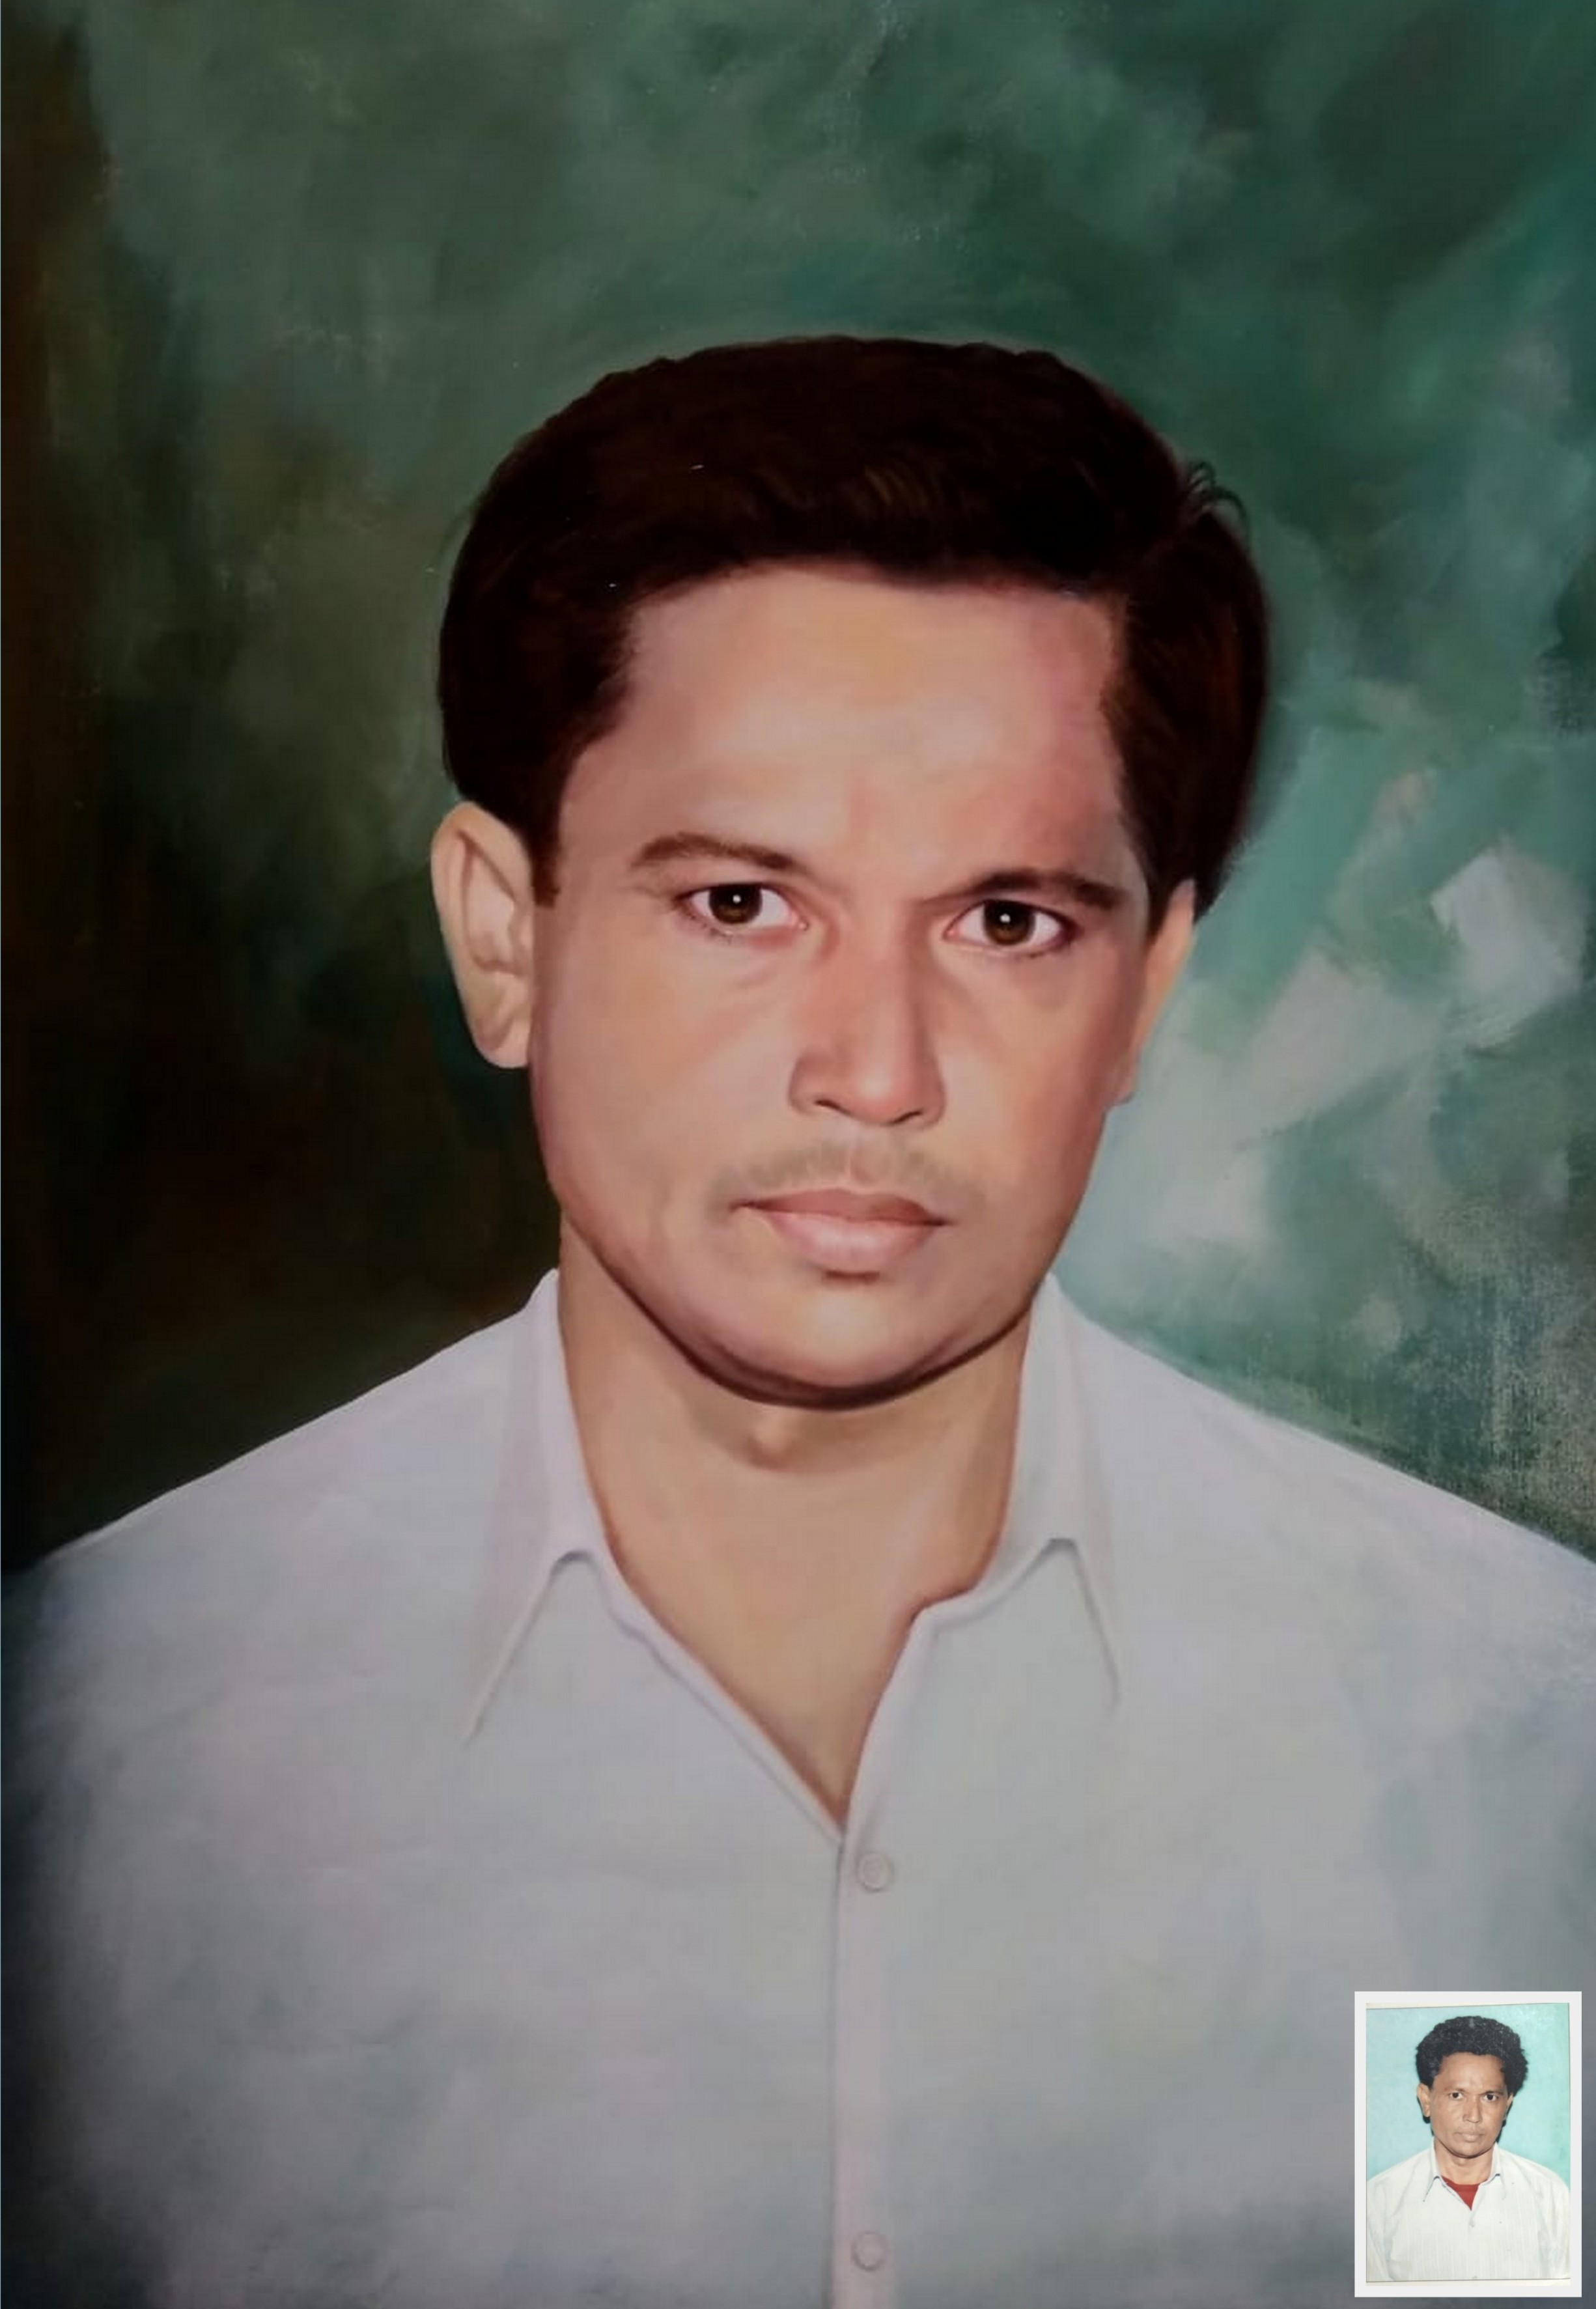 old photo to painting, painting from photo, memorial oil painting, oil portrait memorial painting, 